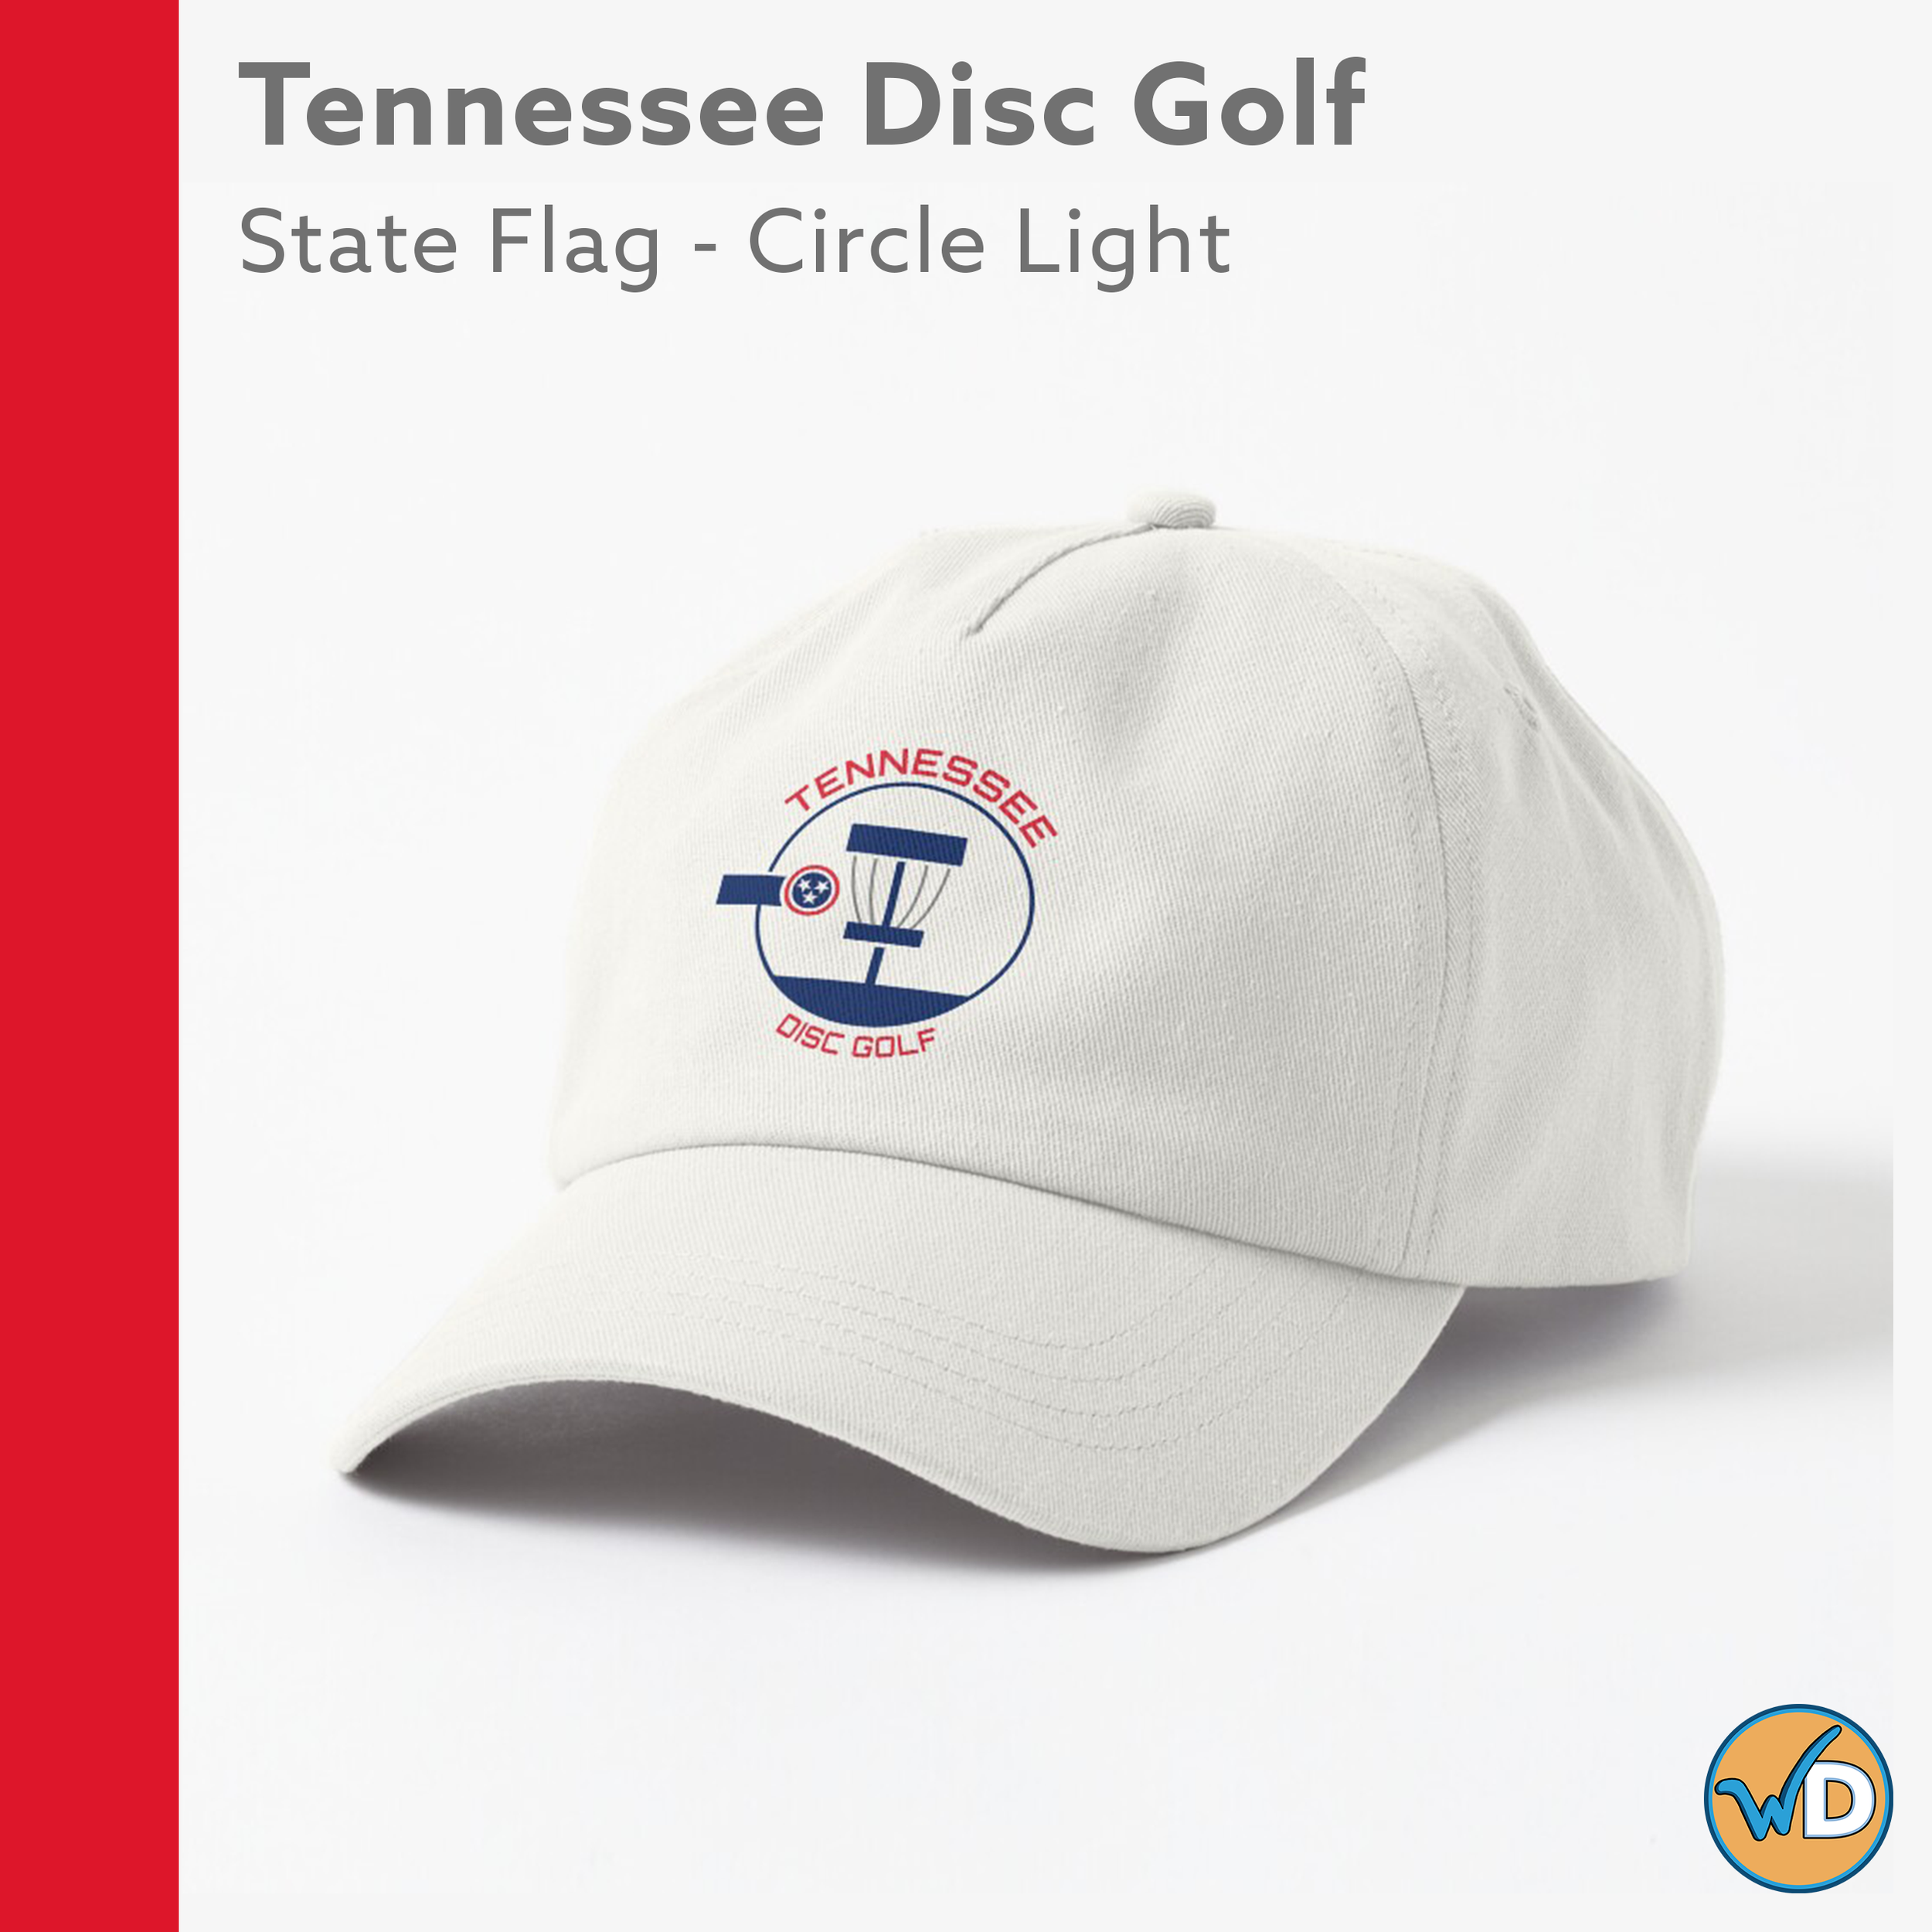 Tennessee Disc Golf Hats